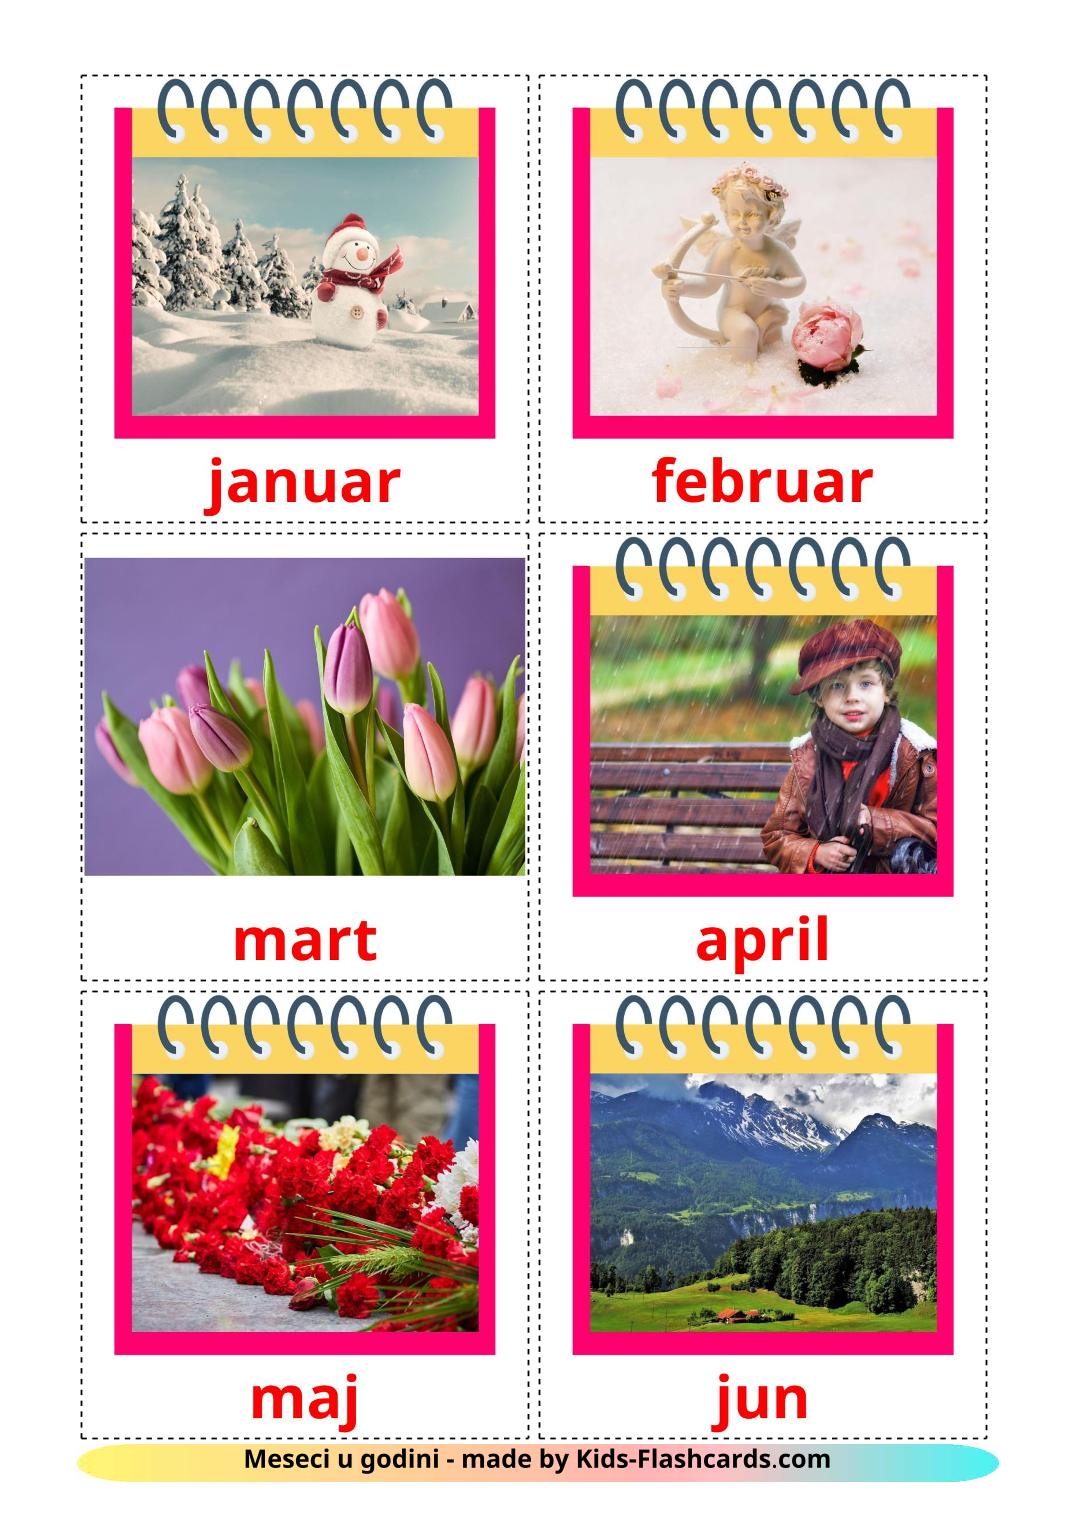 Months of the Year - 12 Free Printable serbian Flashcards 